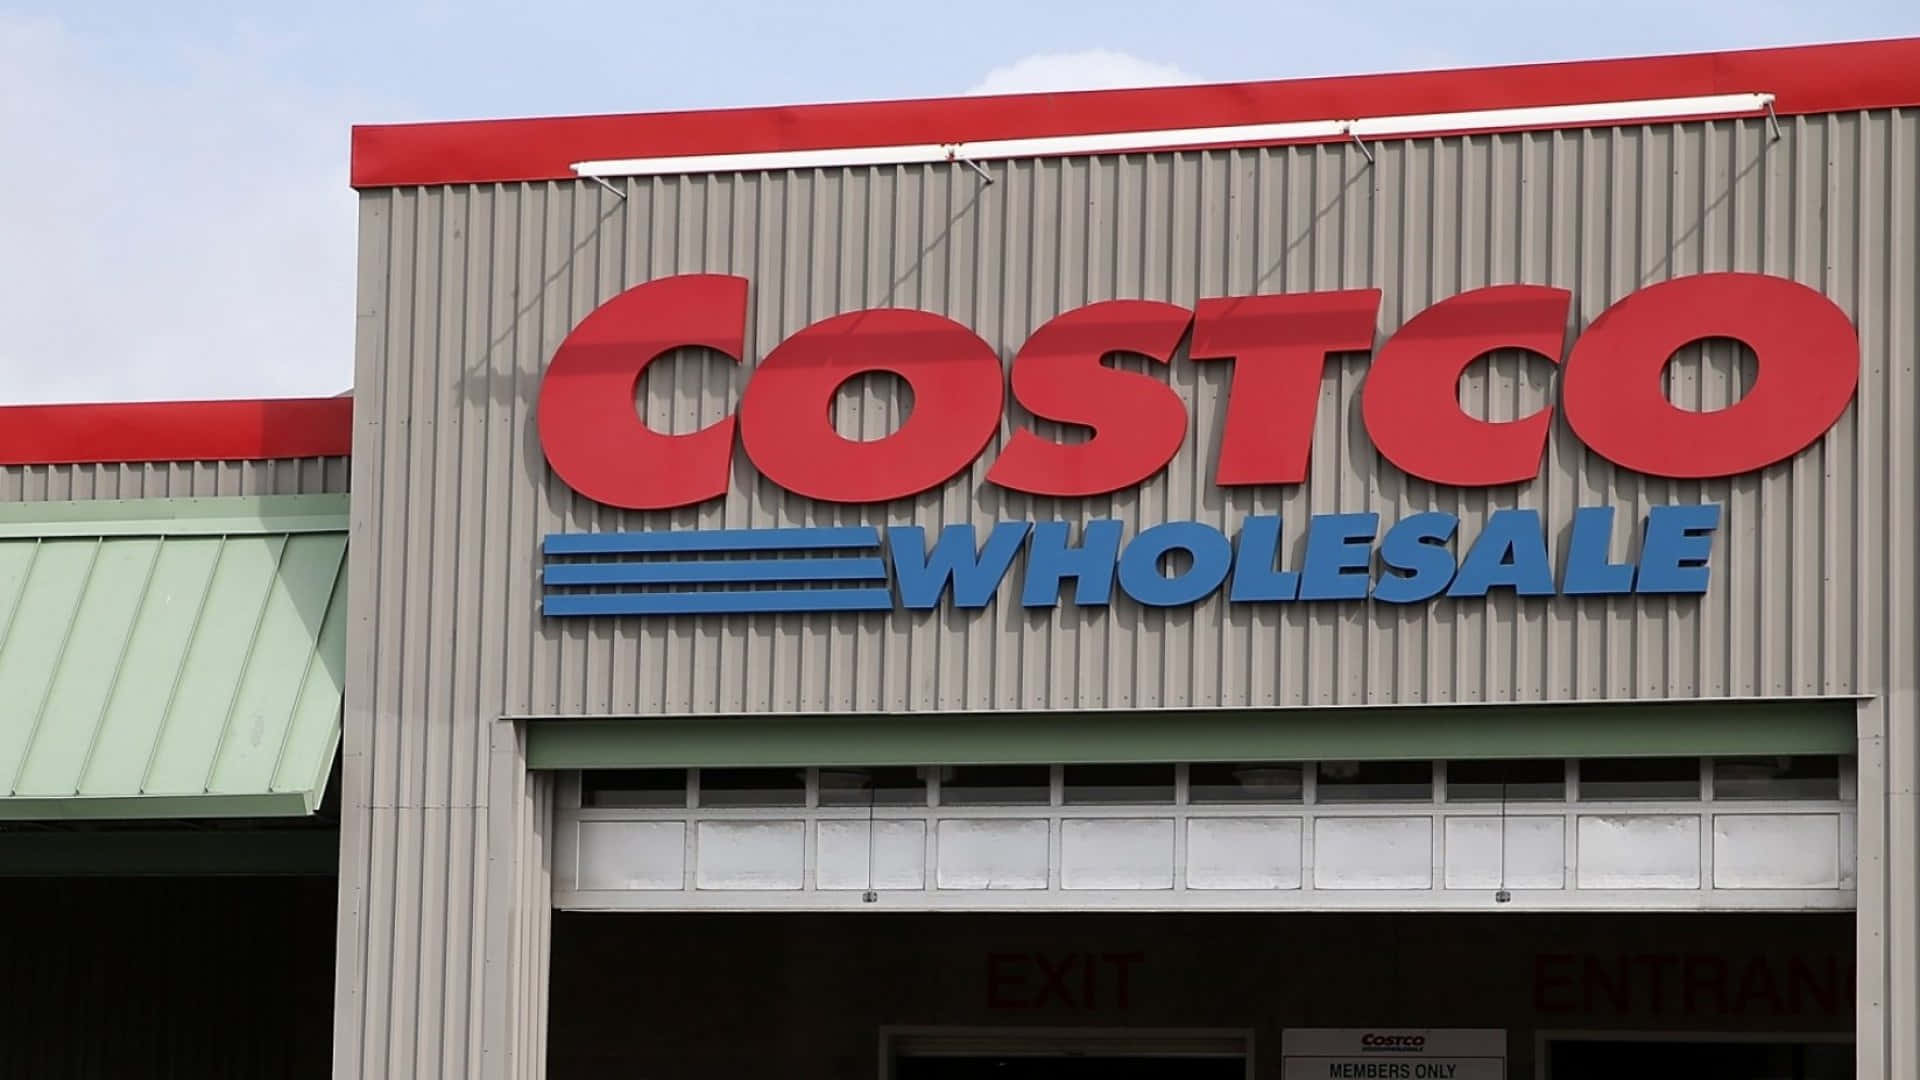 Costco Wholesale Is A Large Store With A Sign